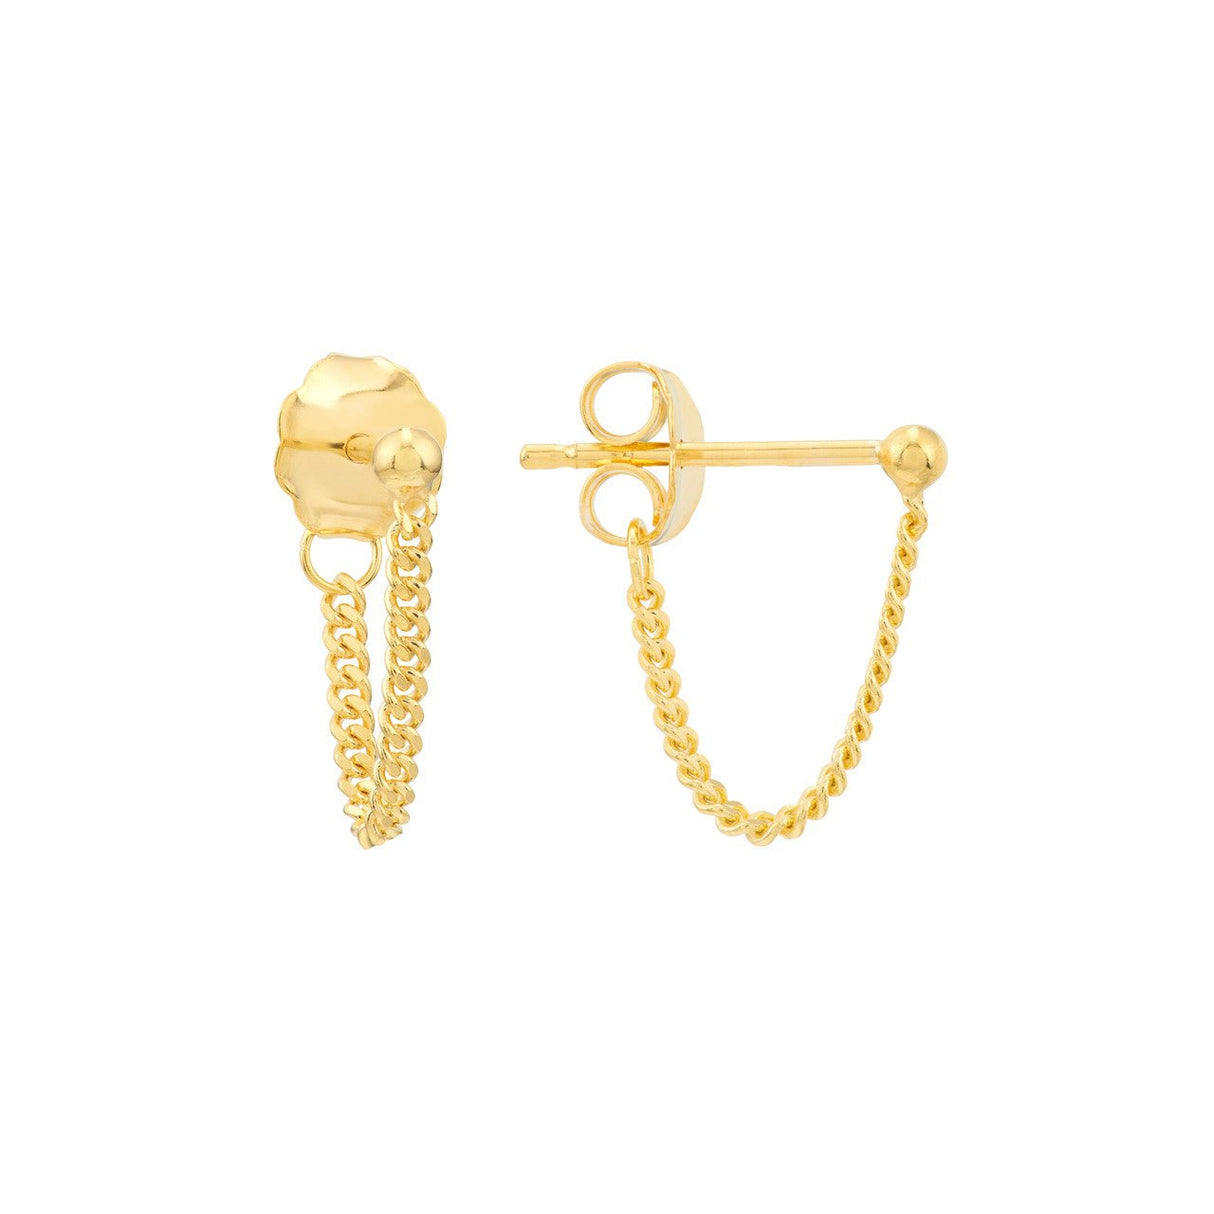 Featuring a bold curb chain front-to-back design set in Gold Chain Earring, these stunning earrings will make any occasion special. They're the perfect gift for her, birthdays or just because. Crafted with pristine Diamond Origin Gold, these earrings offer the perfect blend of sophisticated style and bold fashion. Show her you care with a timeless and fashionable gift!  gift for her,  birthday gift, gold gift,  love gift,